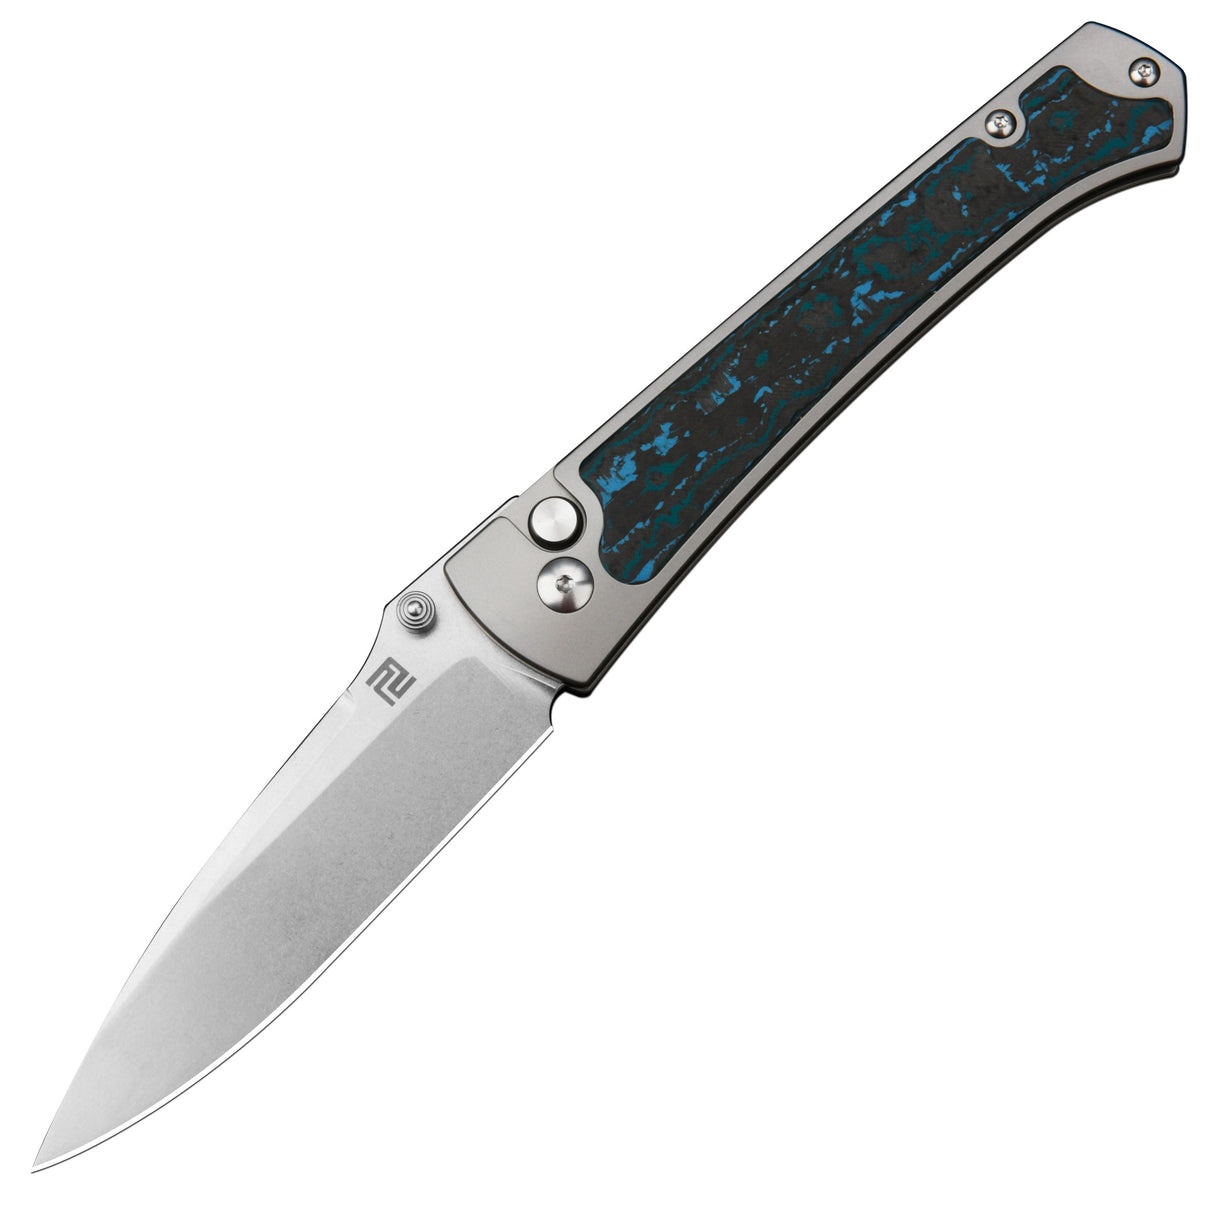 Artisan Cutlery Andromeda 1856G-FCG M390 Blade Titanium and Fat Carbon Handle Folding Knife (Limited Edition)